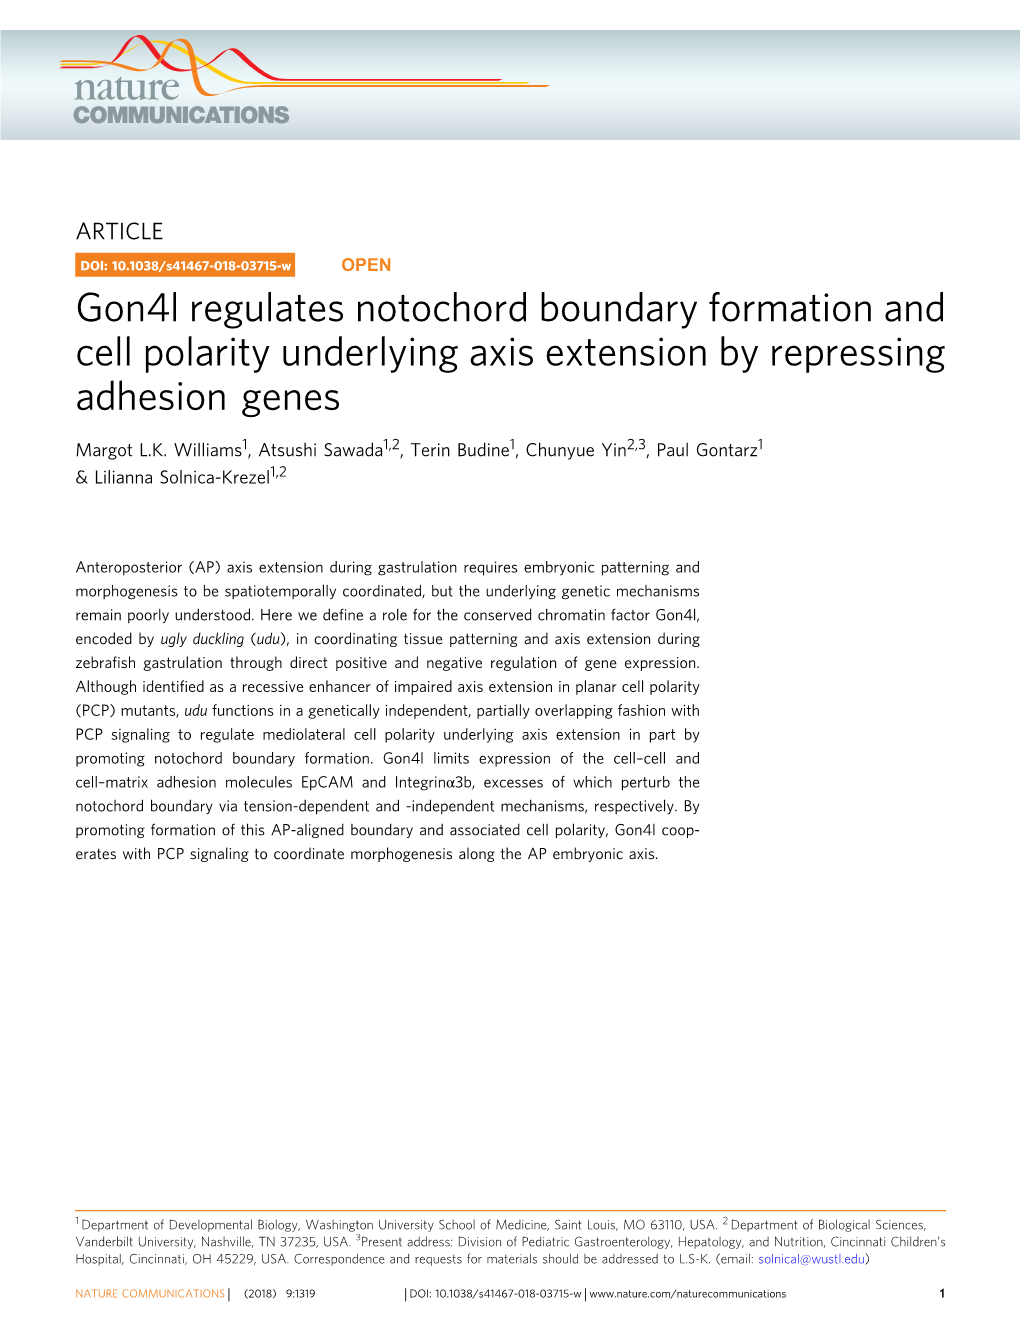 Gon4l Regulates Notochord Boundary Formation and Cell Polarity Underlying Axis Extension by Repressing Adhesion Genes